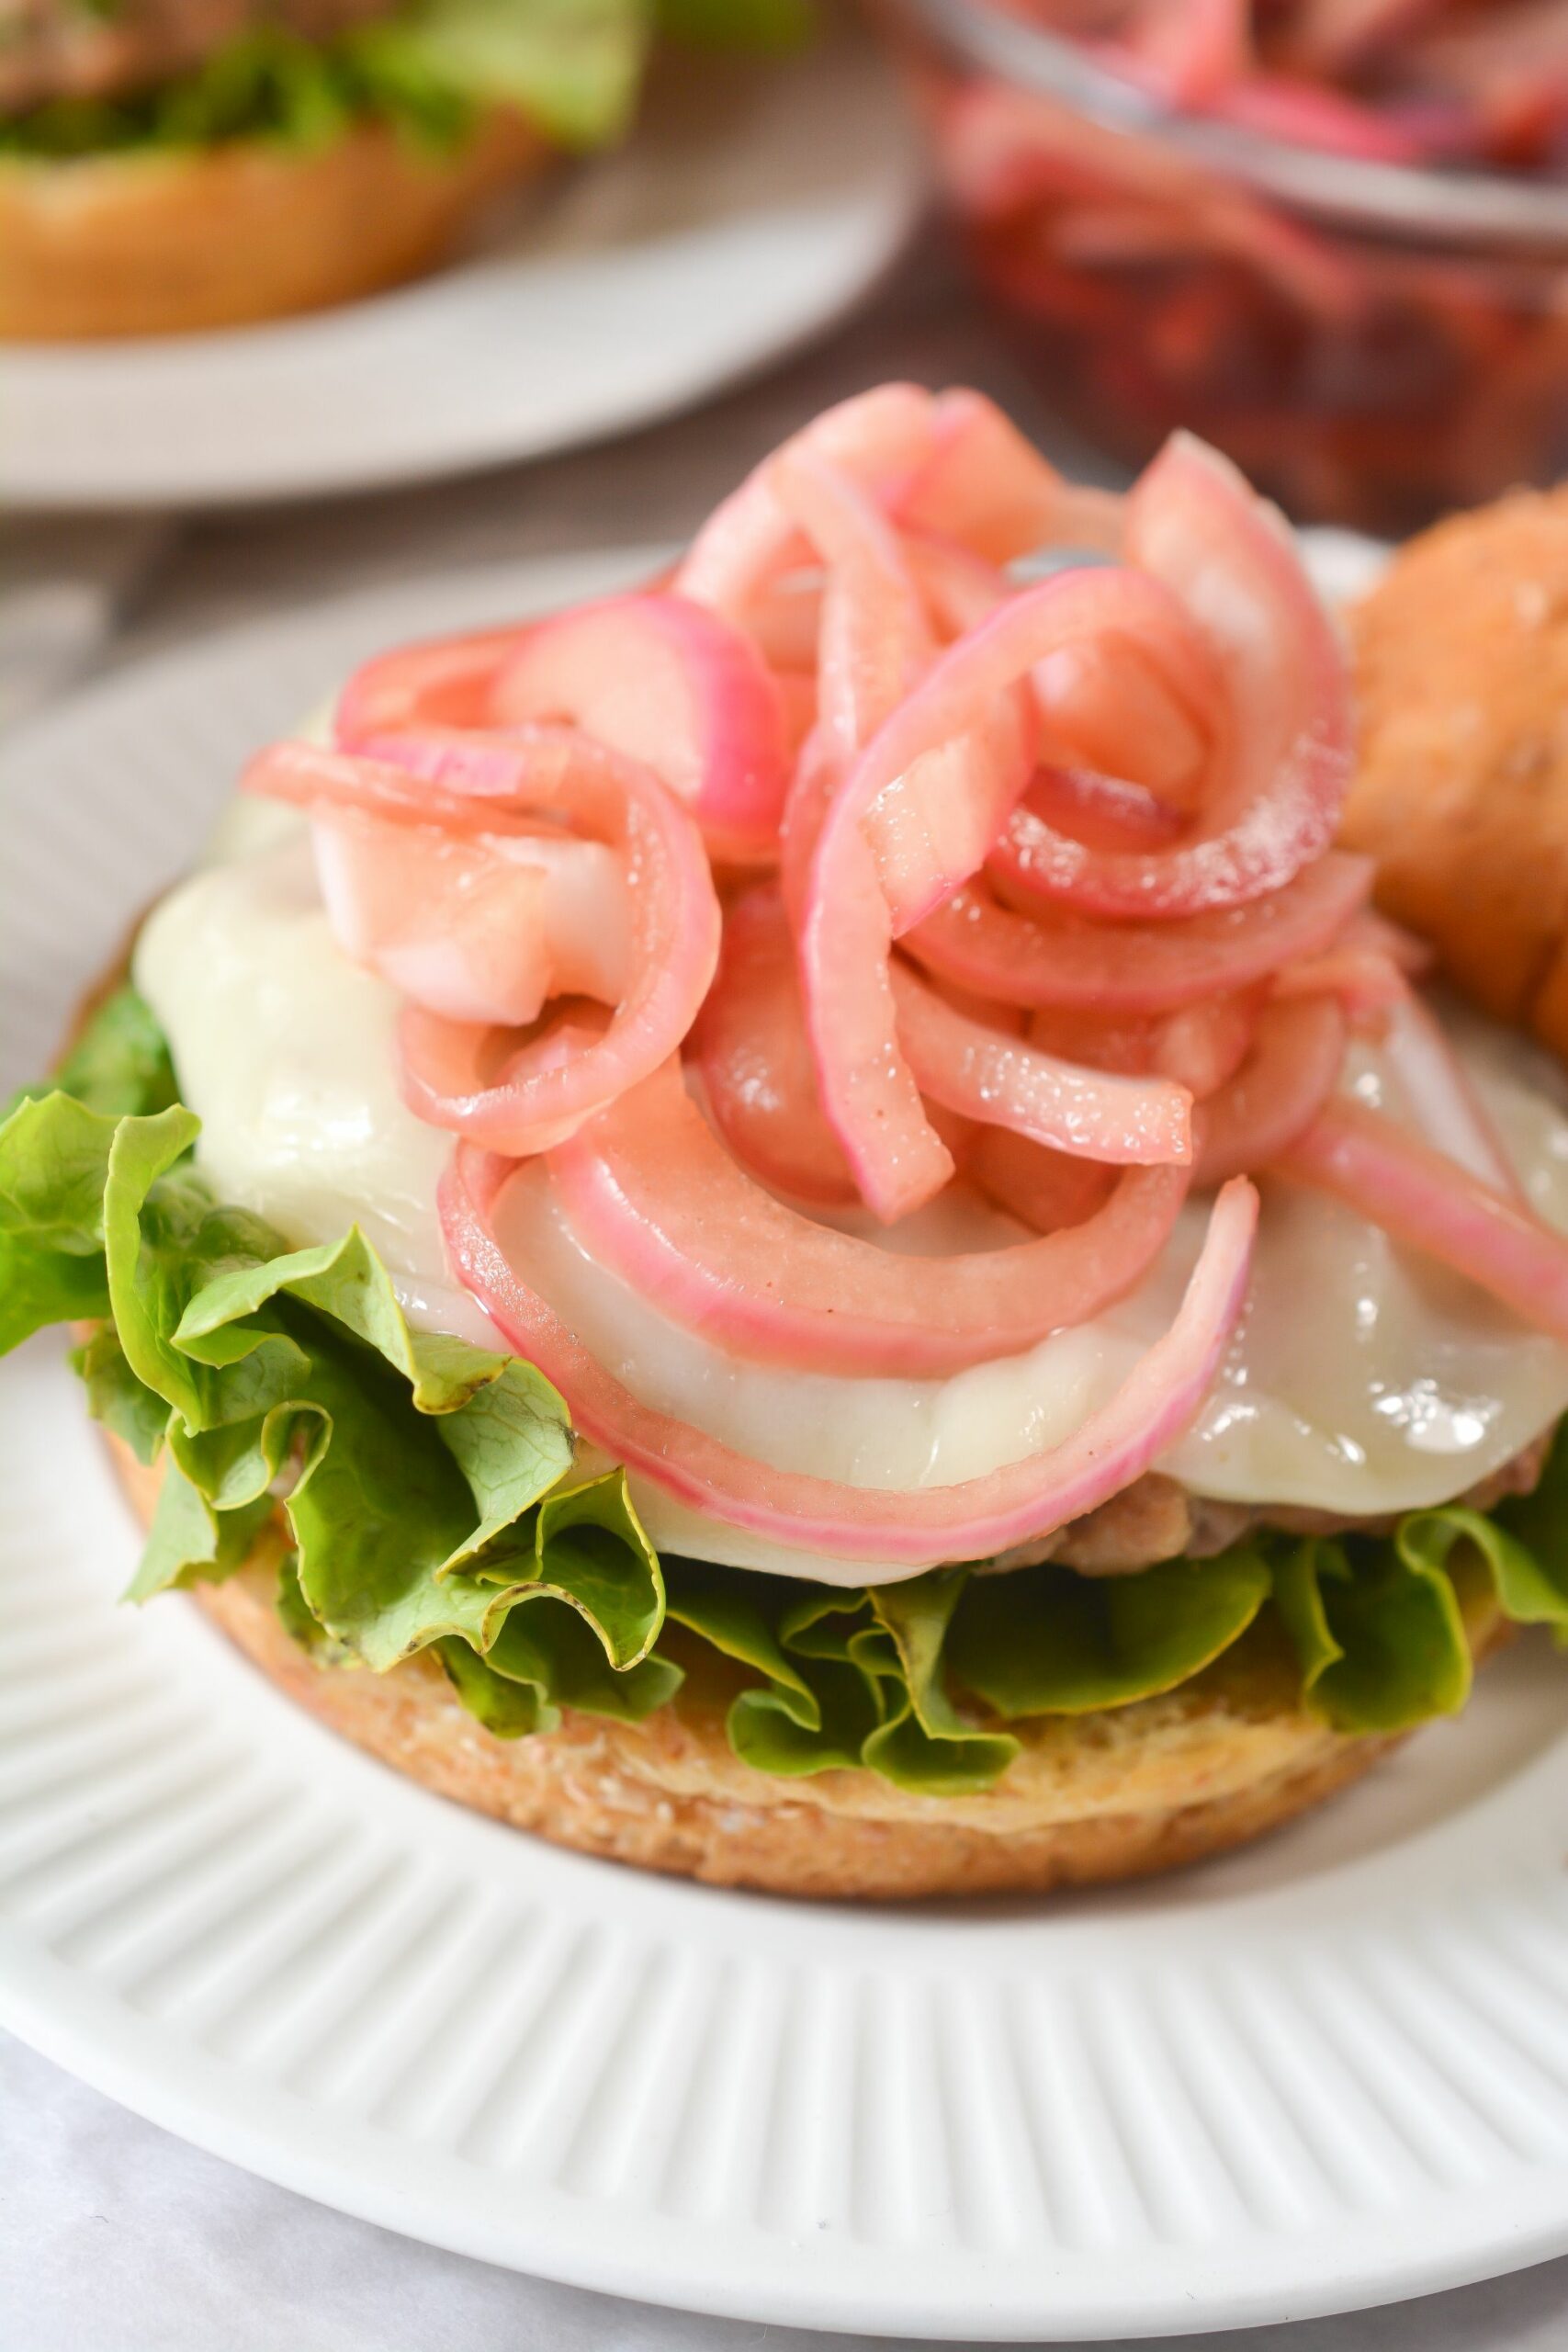 A view of the pickled onions on top of the burger.